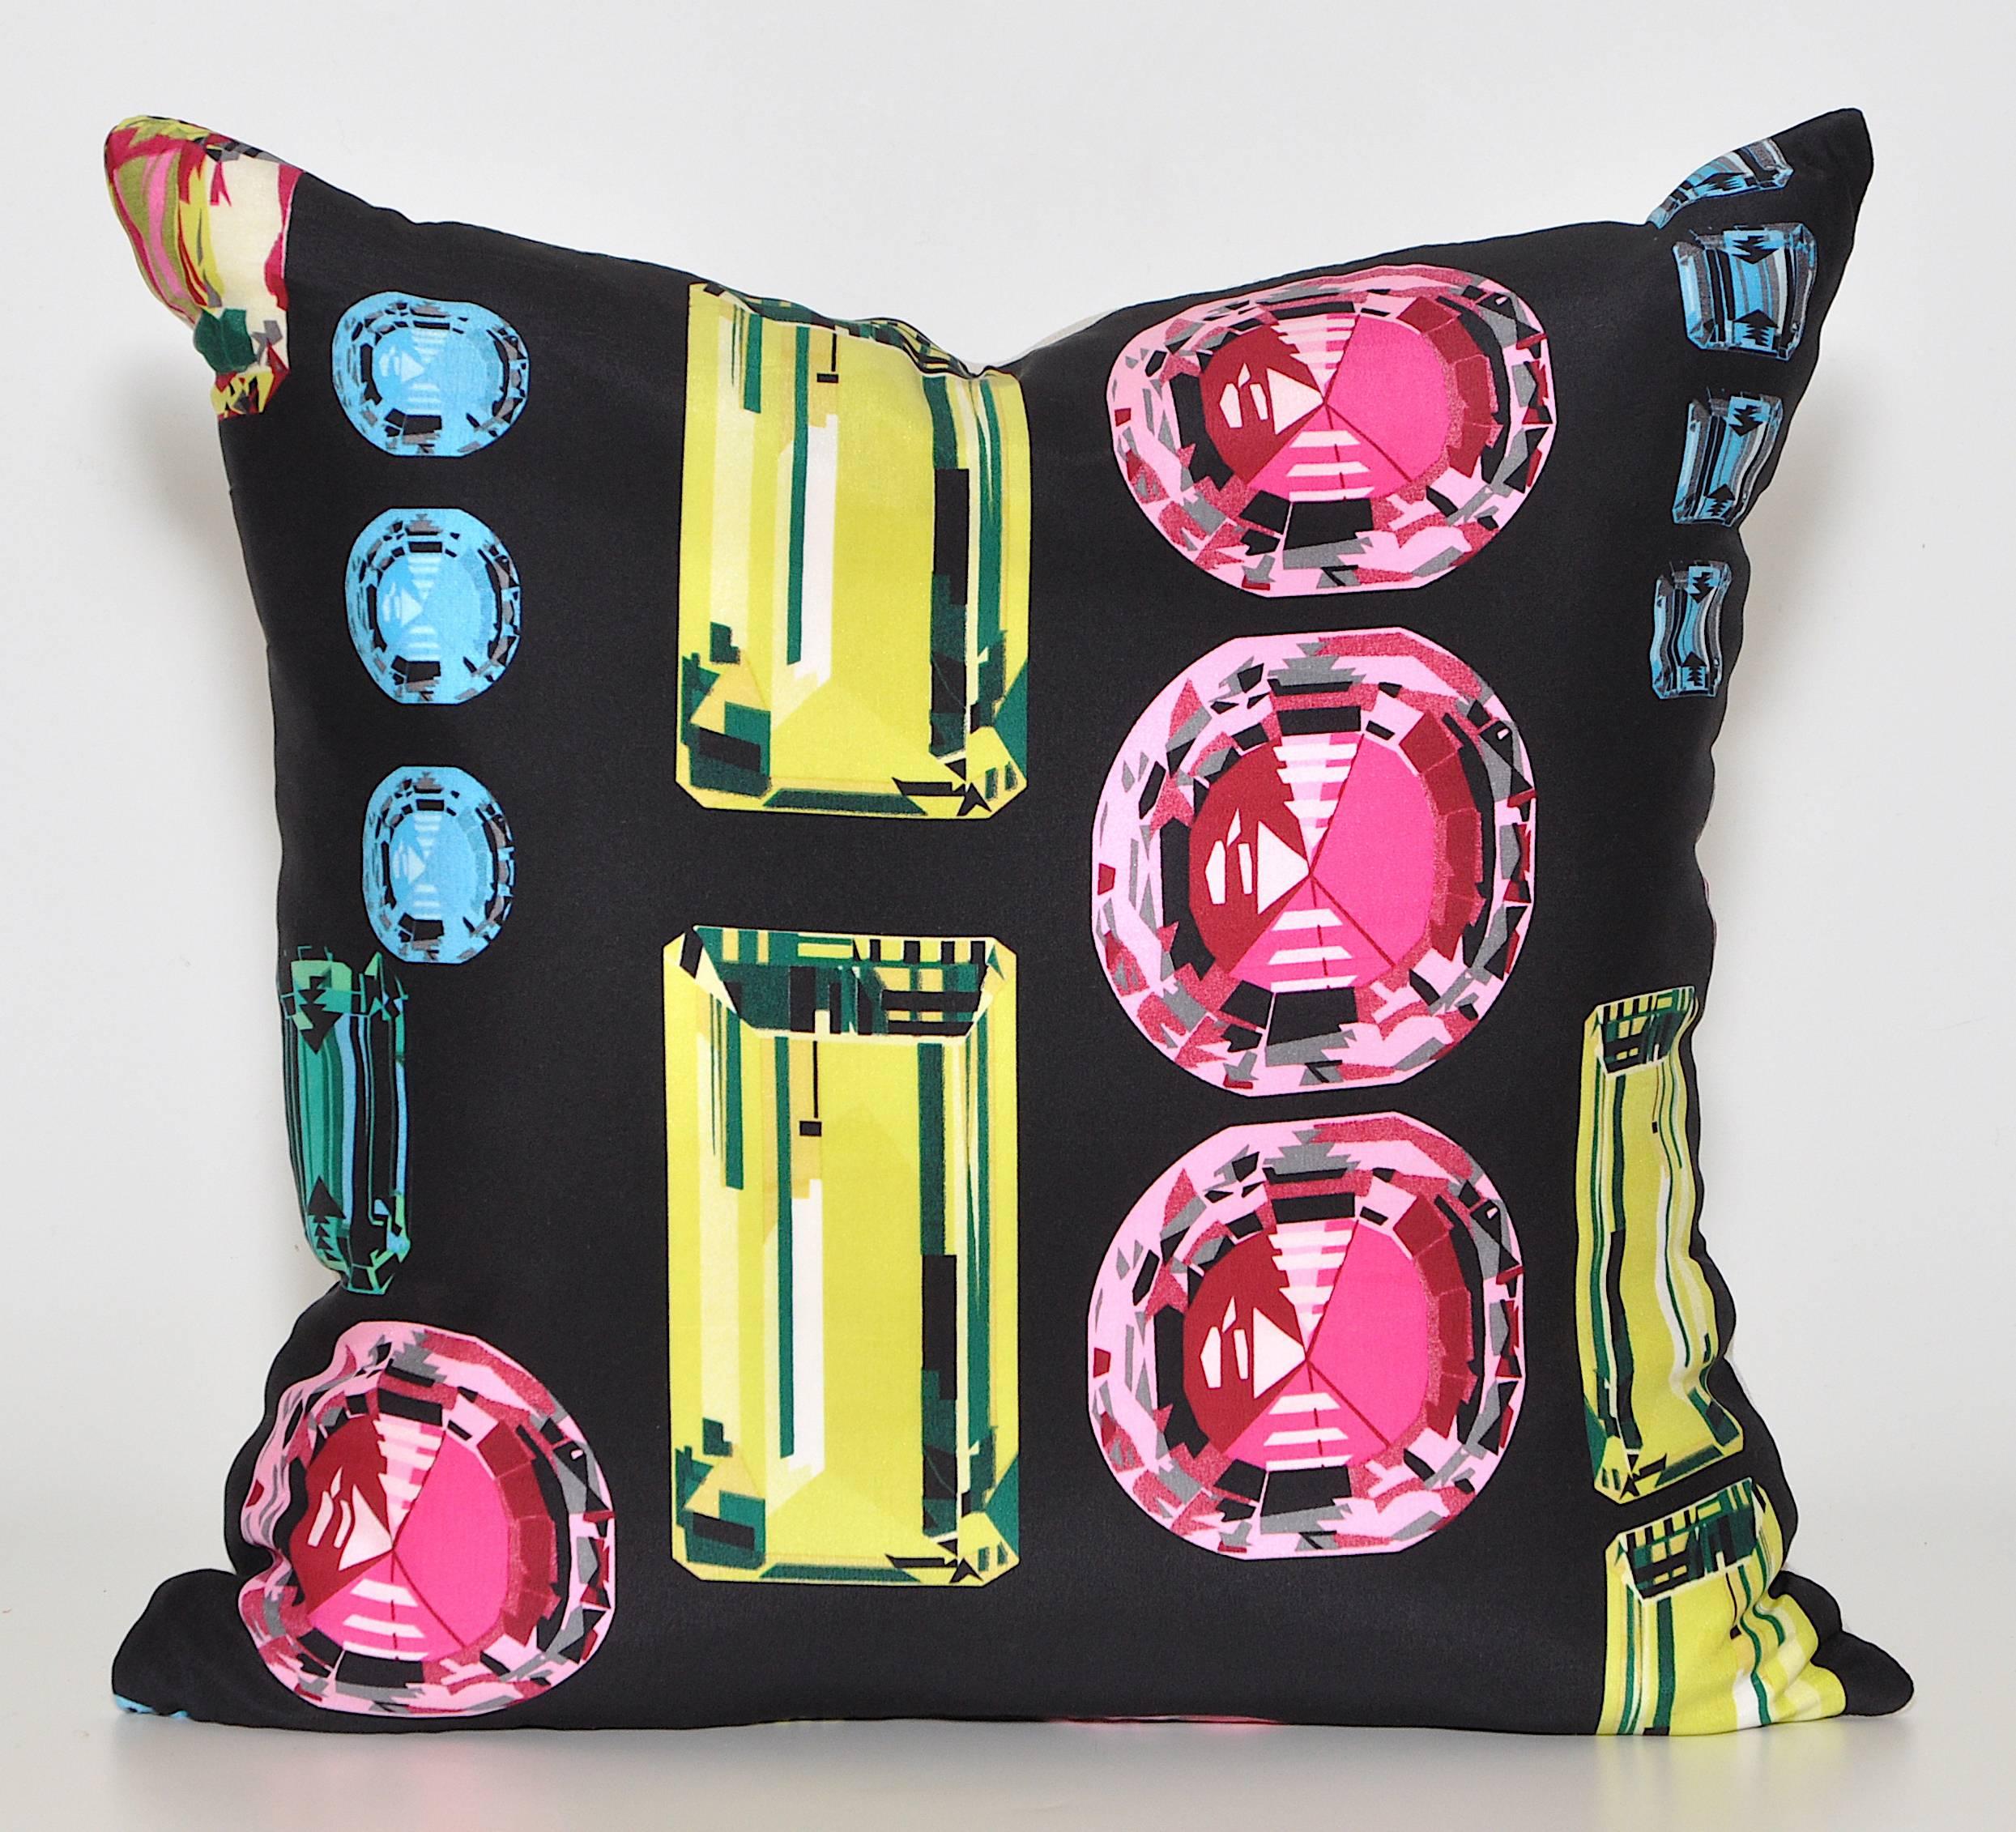 Custom-made one-of-a-kind luxury cushions (pillows) created from an exquisite vintage silk Echo fashion scarf in a multicolored jewel pattern set against a dramatic black ground. Featuring sparkling jewels of a variety of bright colors and sizes